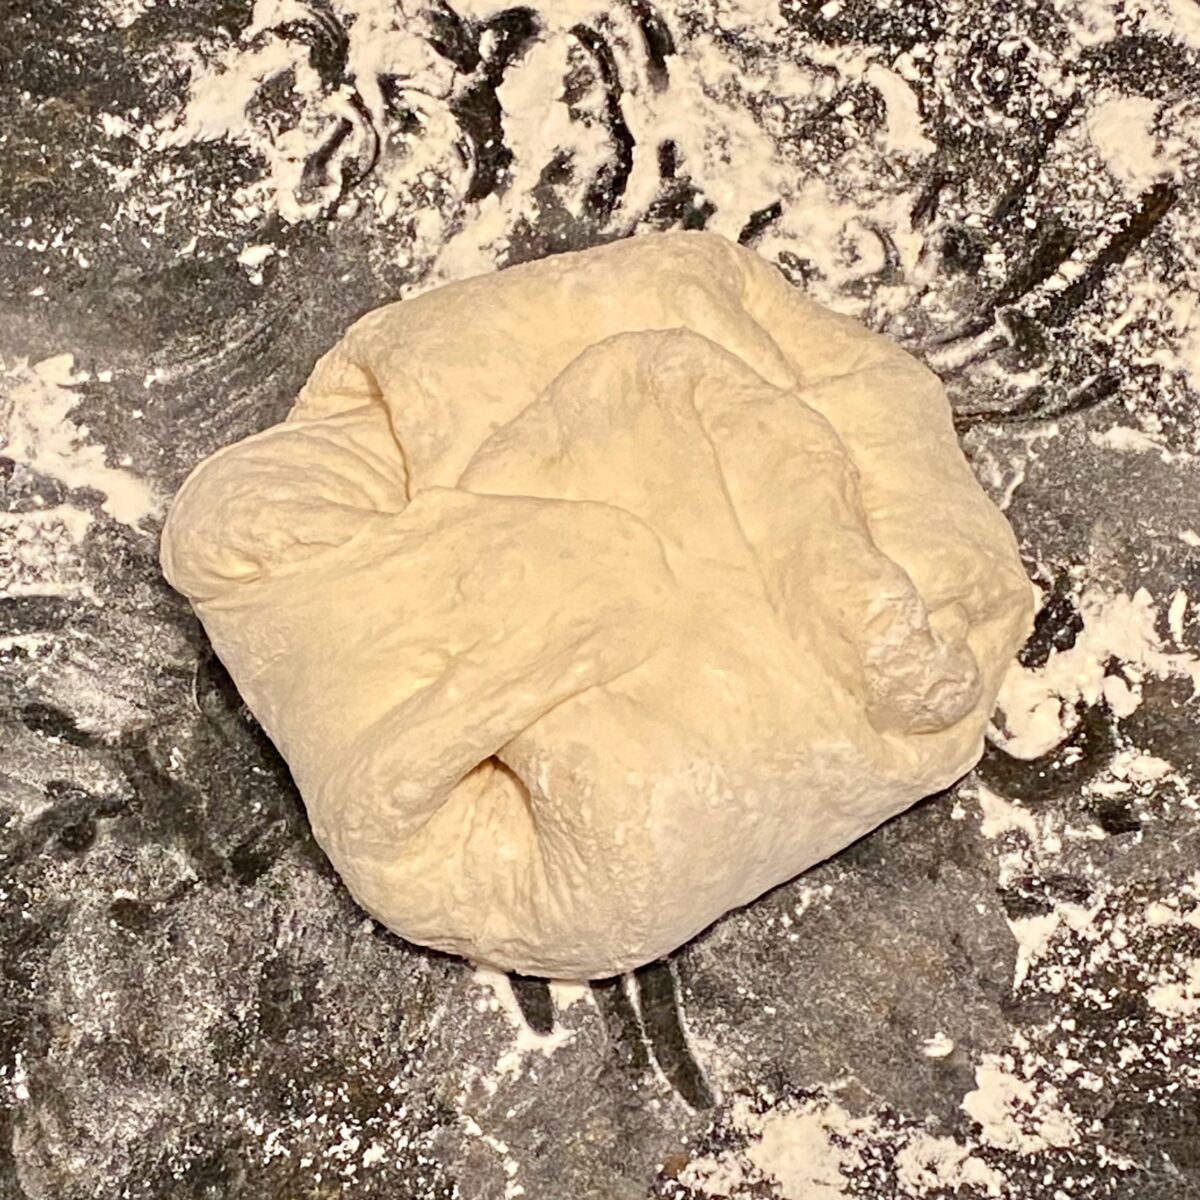 Now, each corner of the square-shaped dough has been stretched out and folded back over the dough.